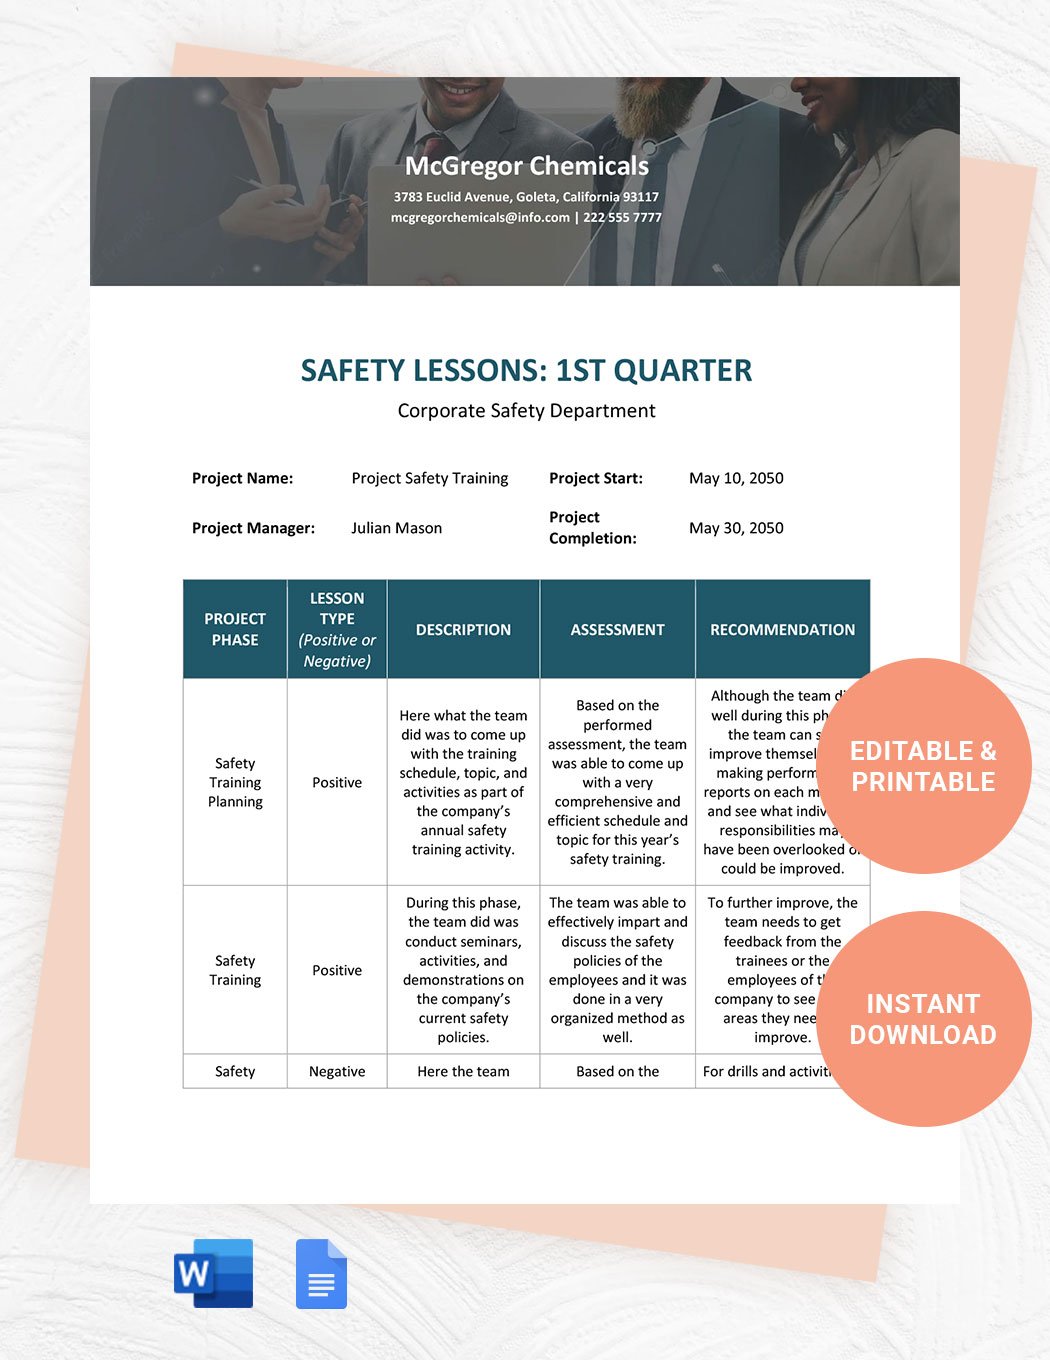 Safety Lessons Learned Template